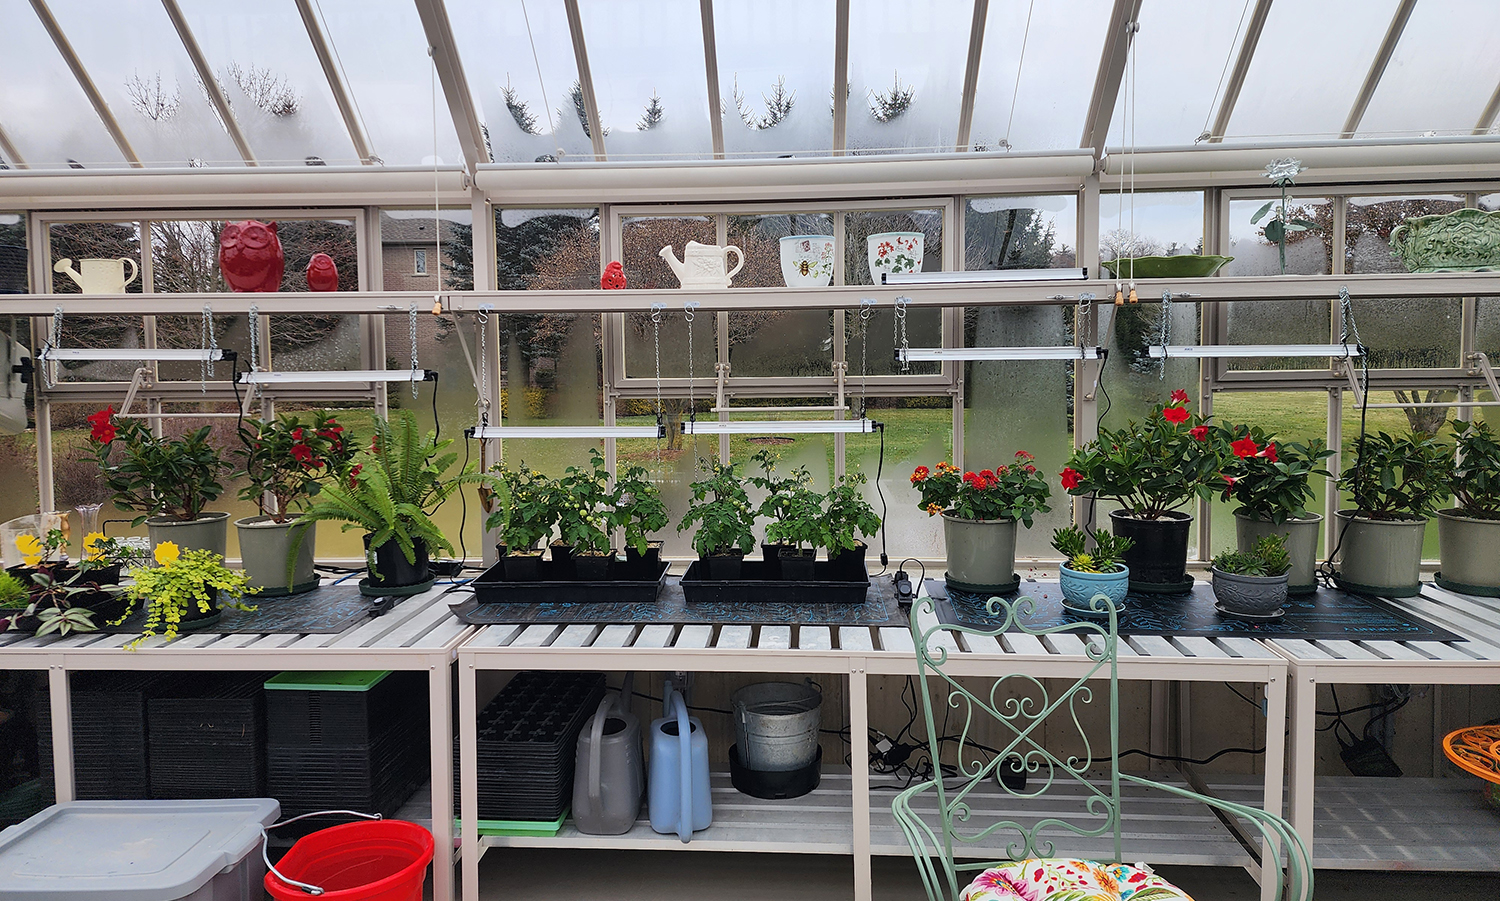 grow lights hanging in the greenhouse